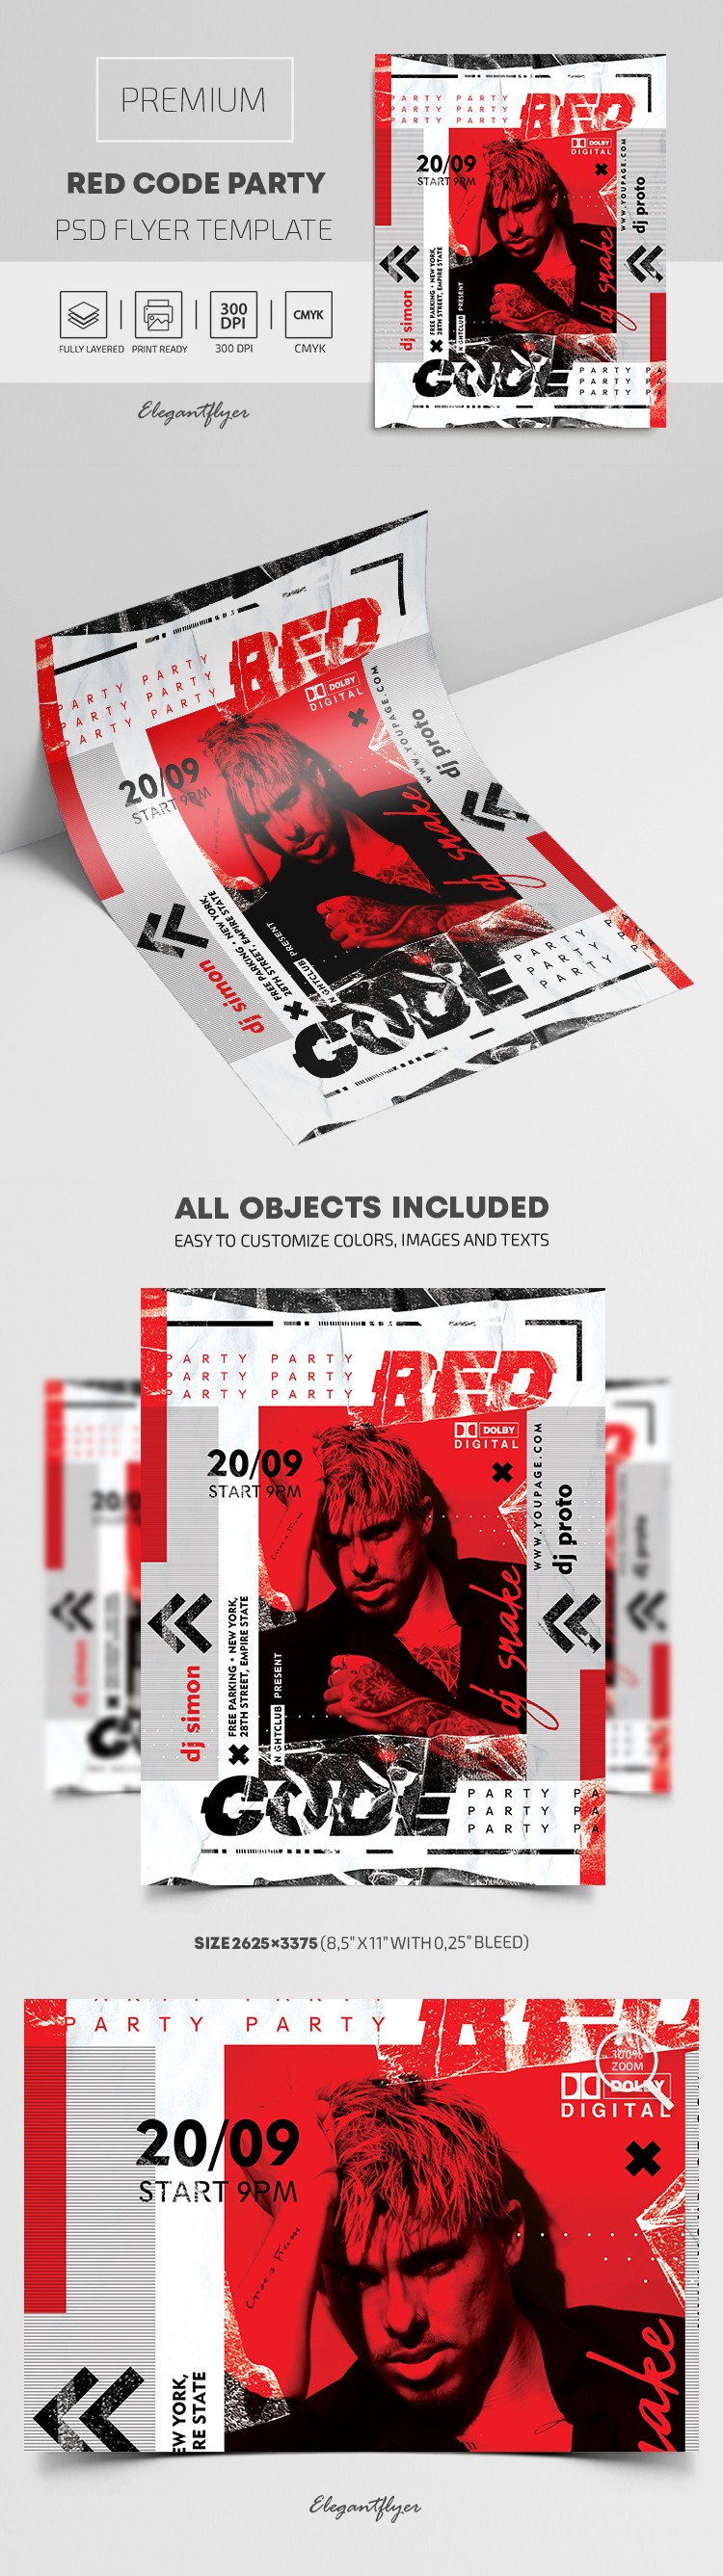 Red Code Party Flyer by ElegantFlyer